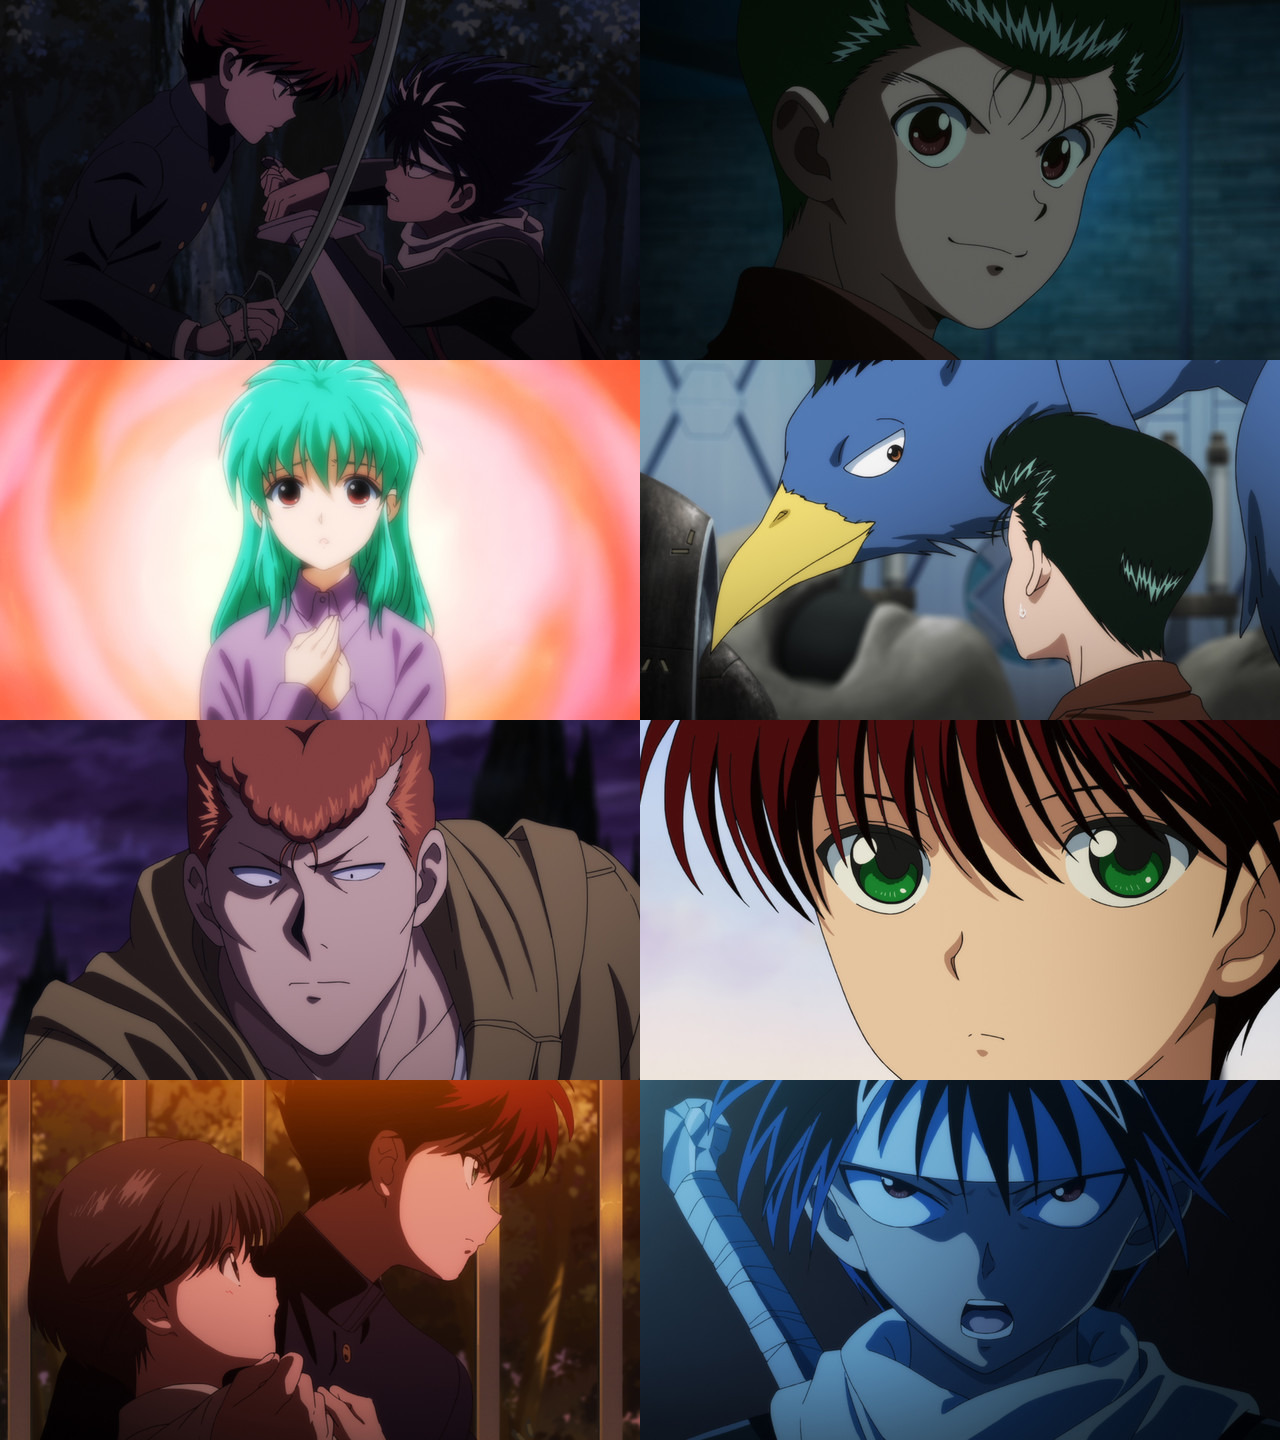 New screencaps from the upcoming âYu Yu Hakushoâ OVA episodes Two Shots and Noruka Soruka. It will be bundled with the fourth part of the animeâs 25th Anniversary Blu-ray Box collection; on sale October 26th (Studio Pierrot)